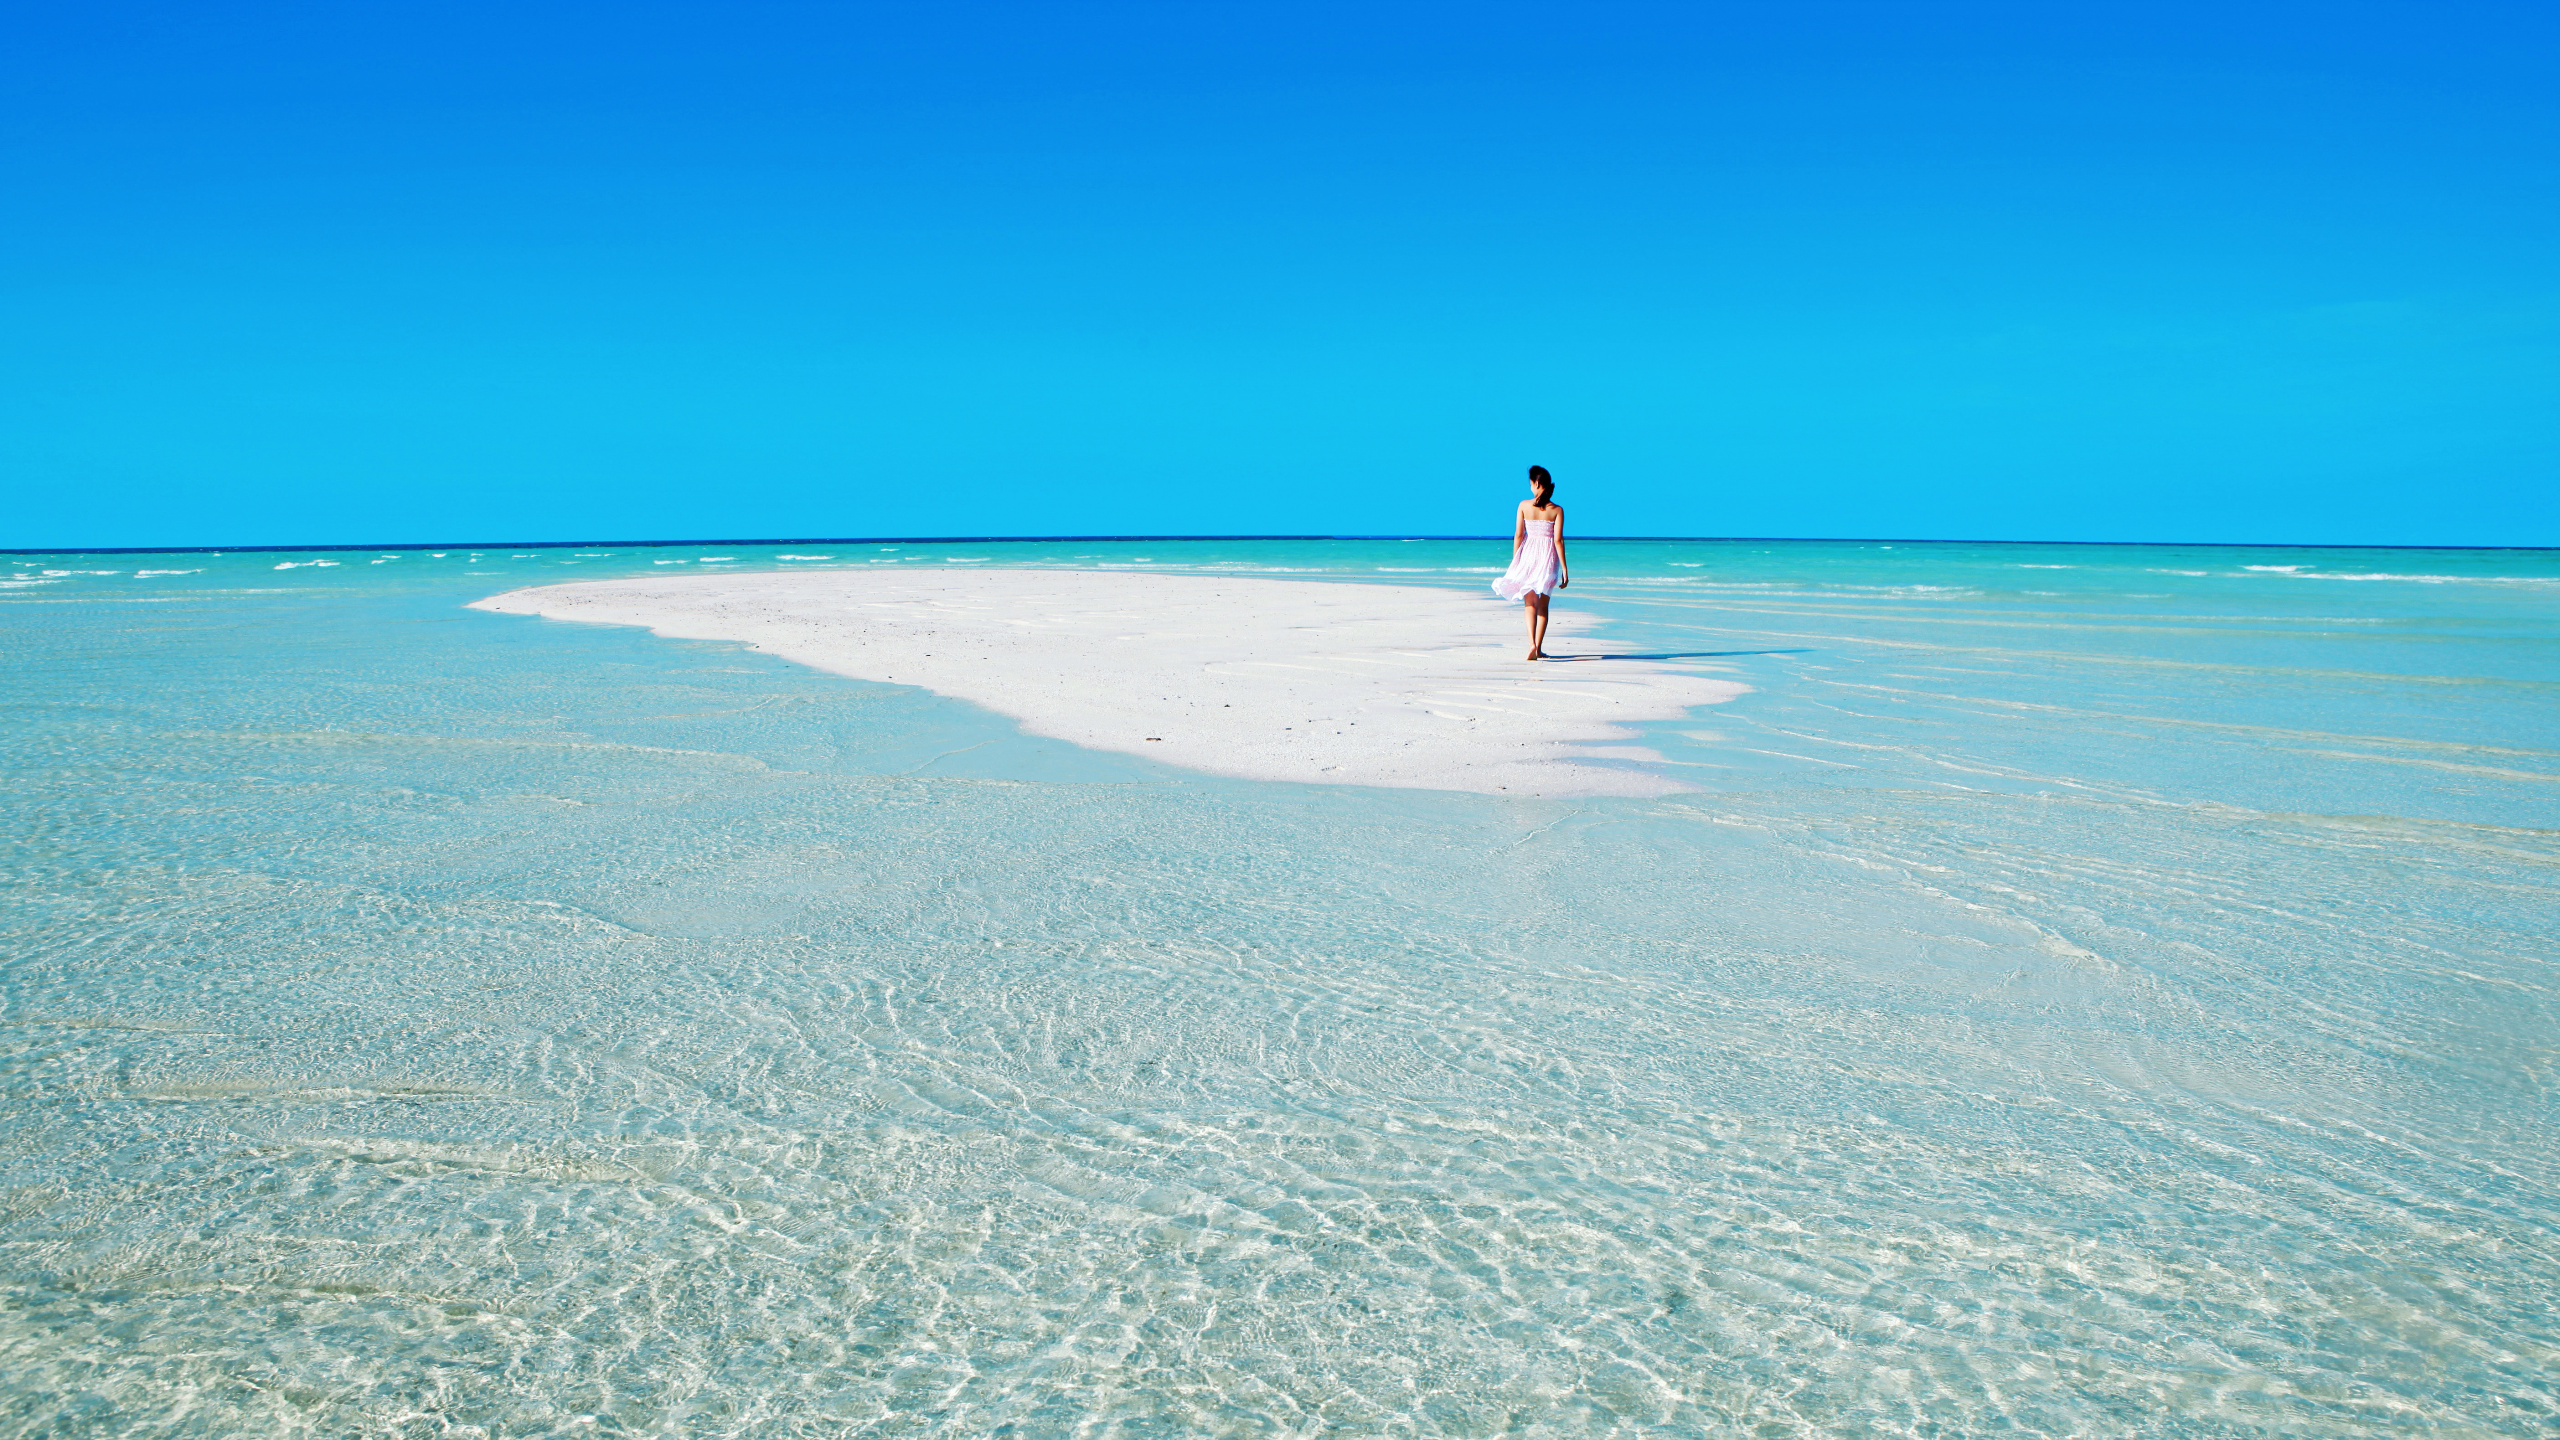 Woman in White Shirt Walking on Beach During Daytime. Wallpaper in 2560x1440 Resolution